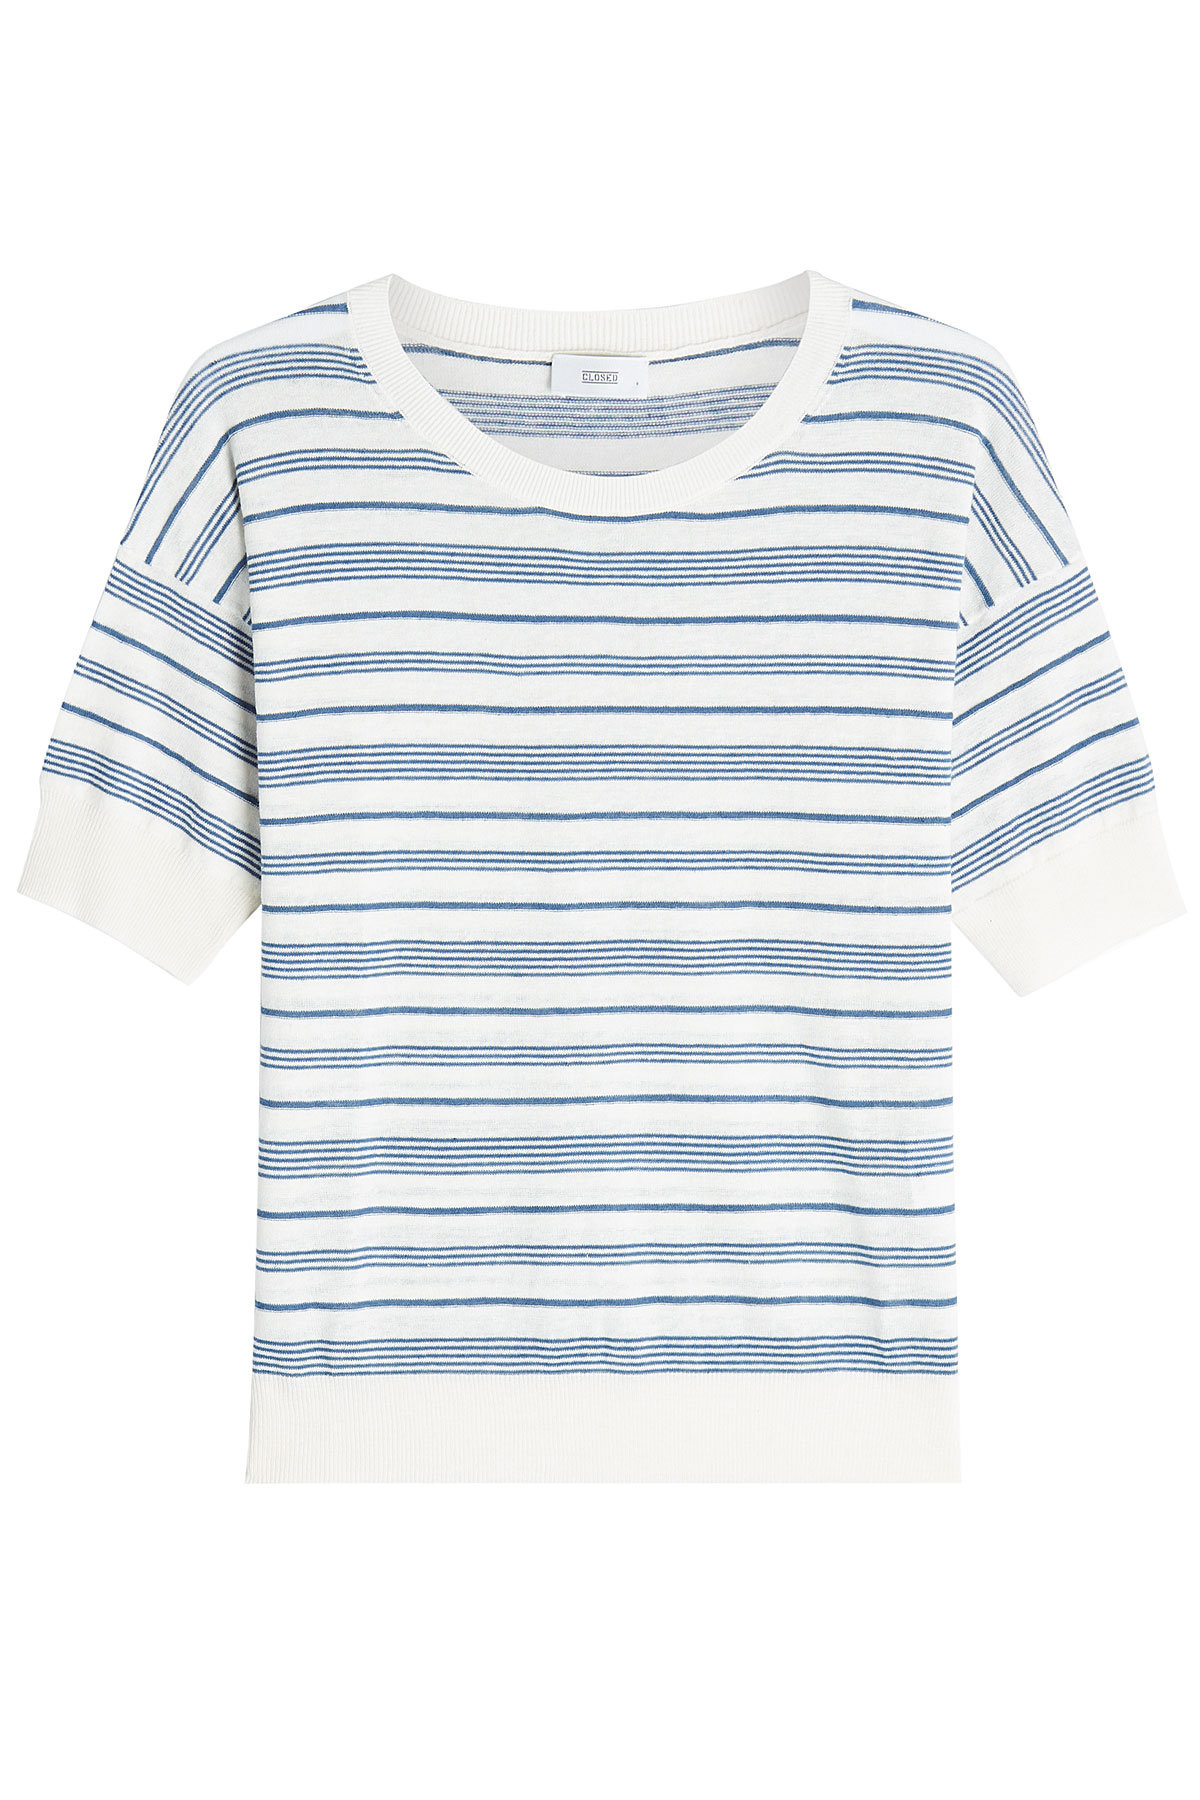 Closed - Striped Linen and Cotton Top